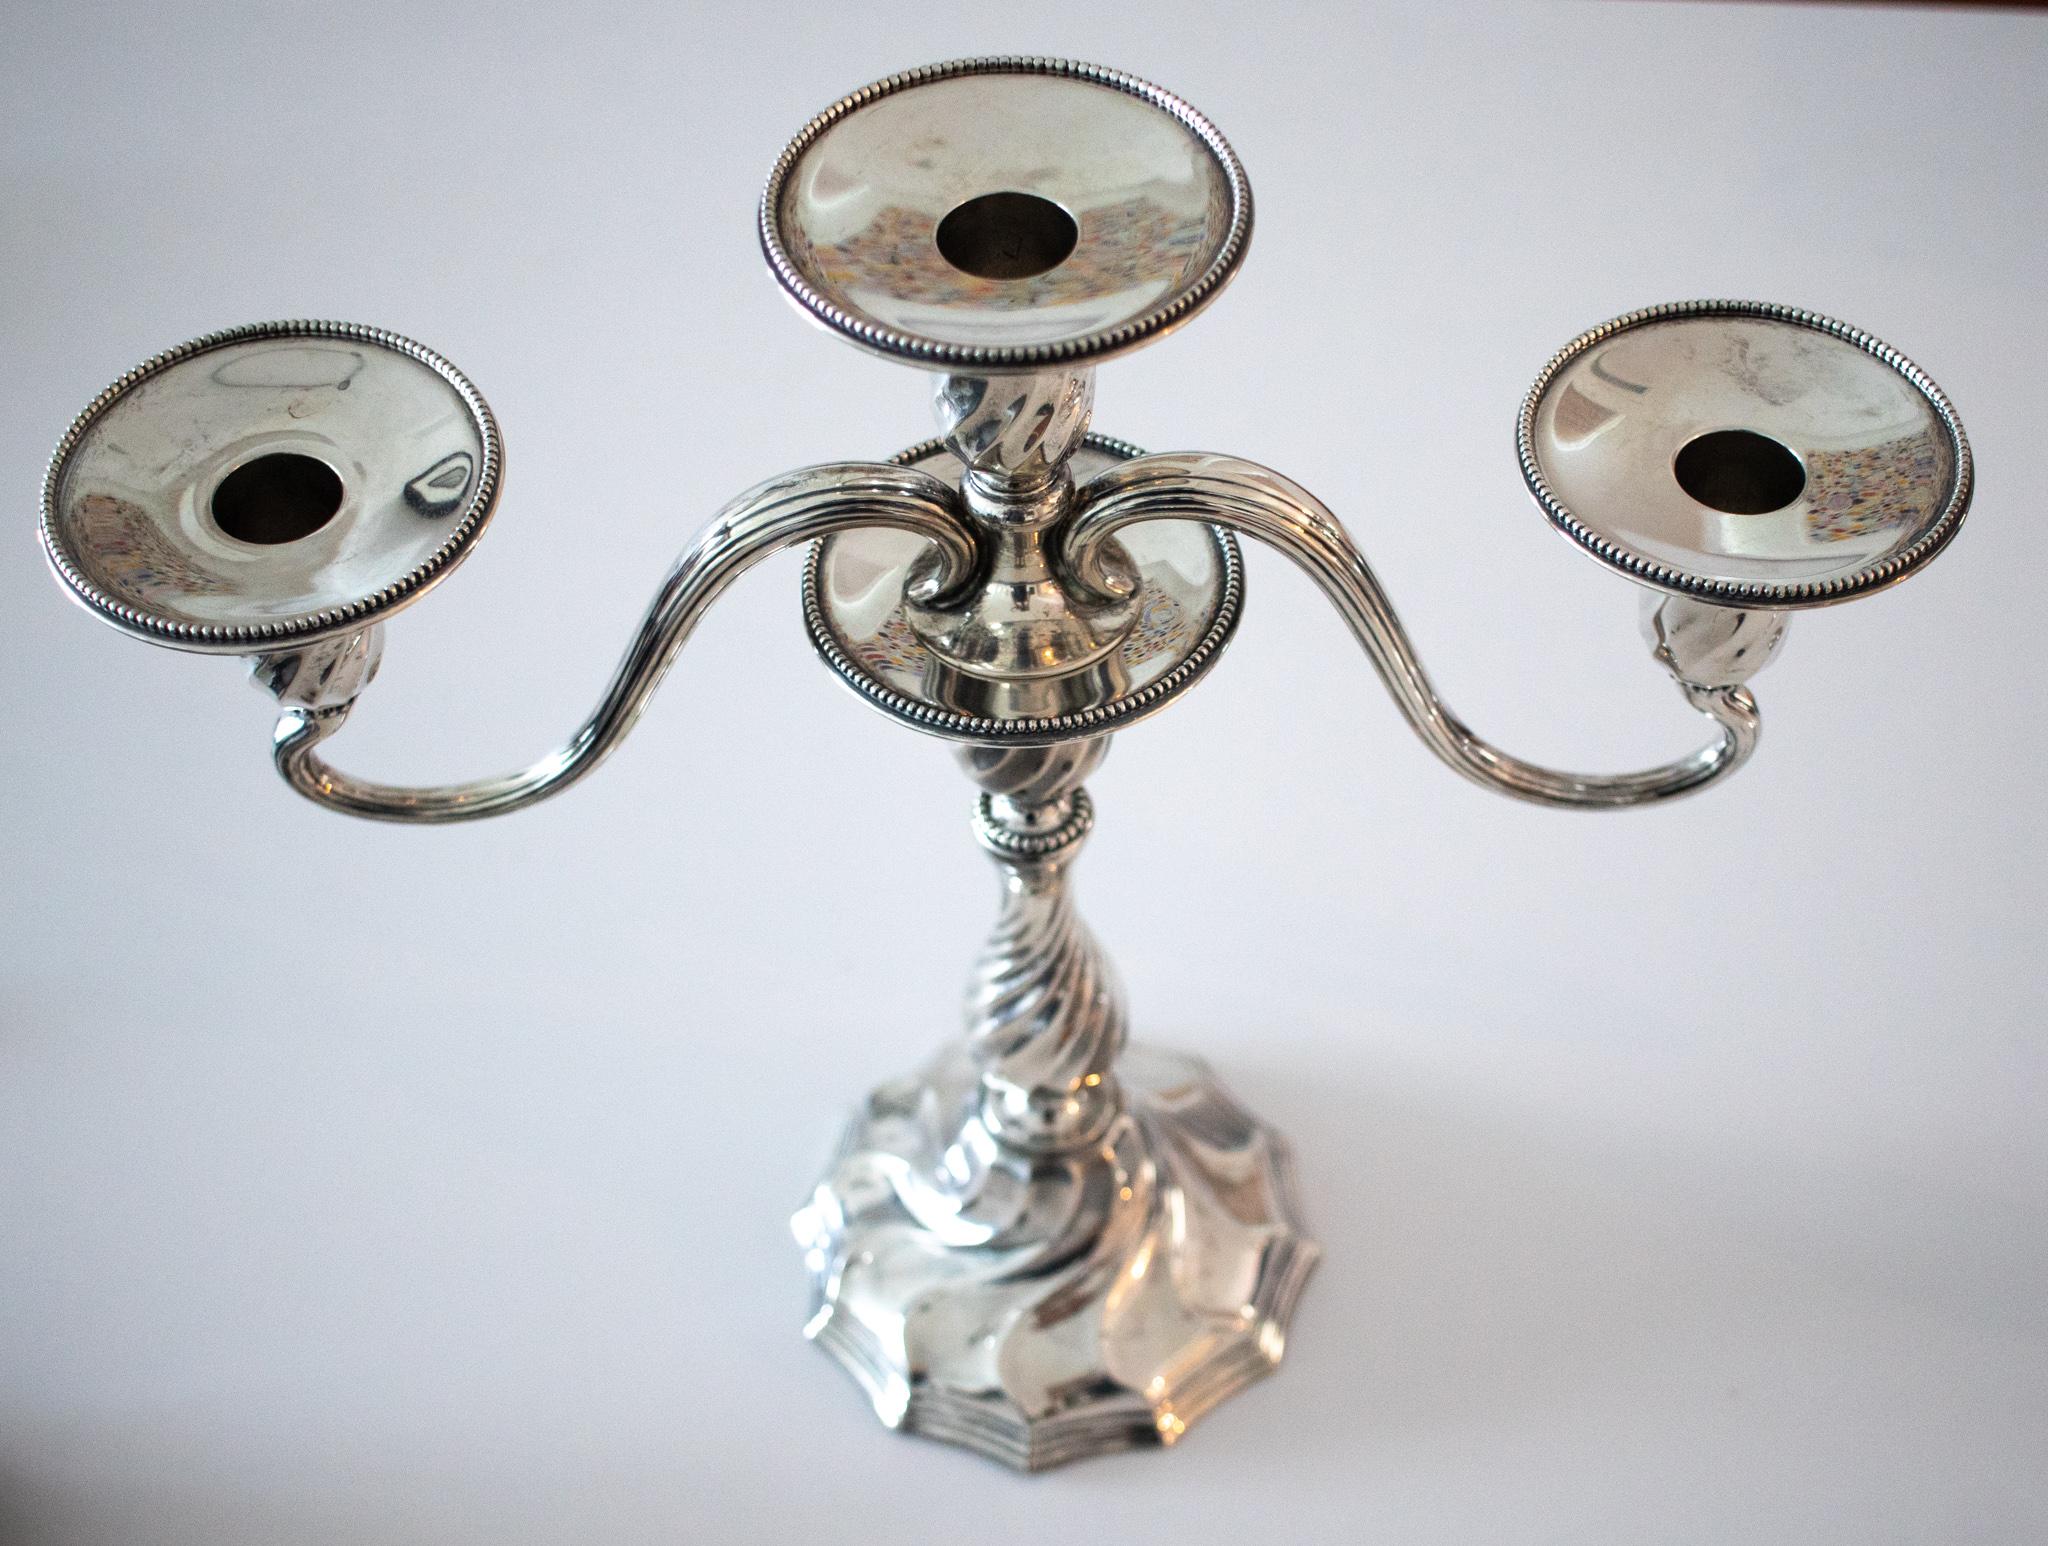 Tiffany & Co. 1902 New York Art Nouveau Pair of Convertible Candelabras Sterling In Excellent Condition For Sale In Miami, FL